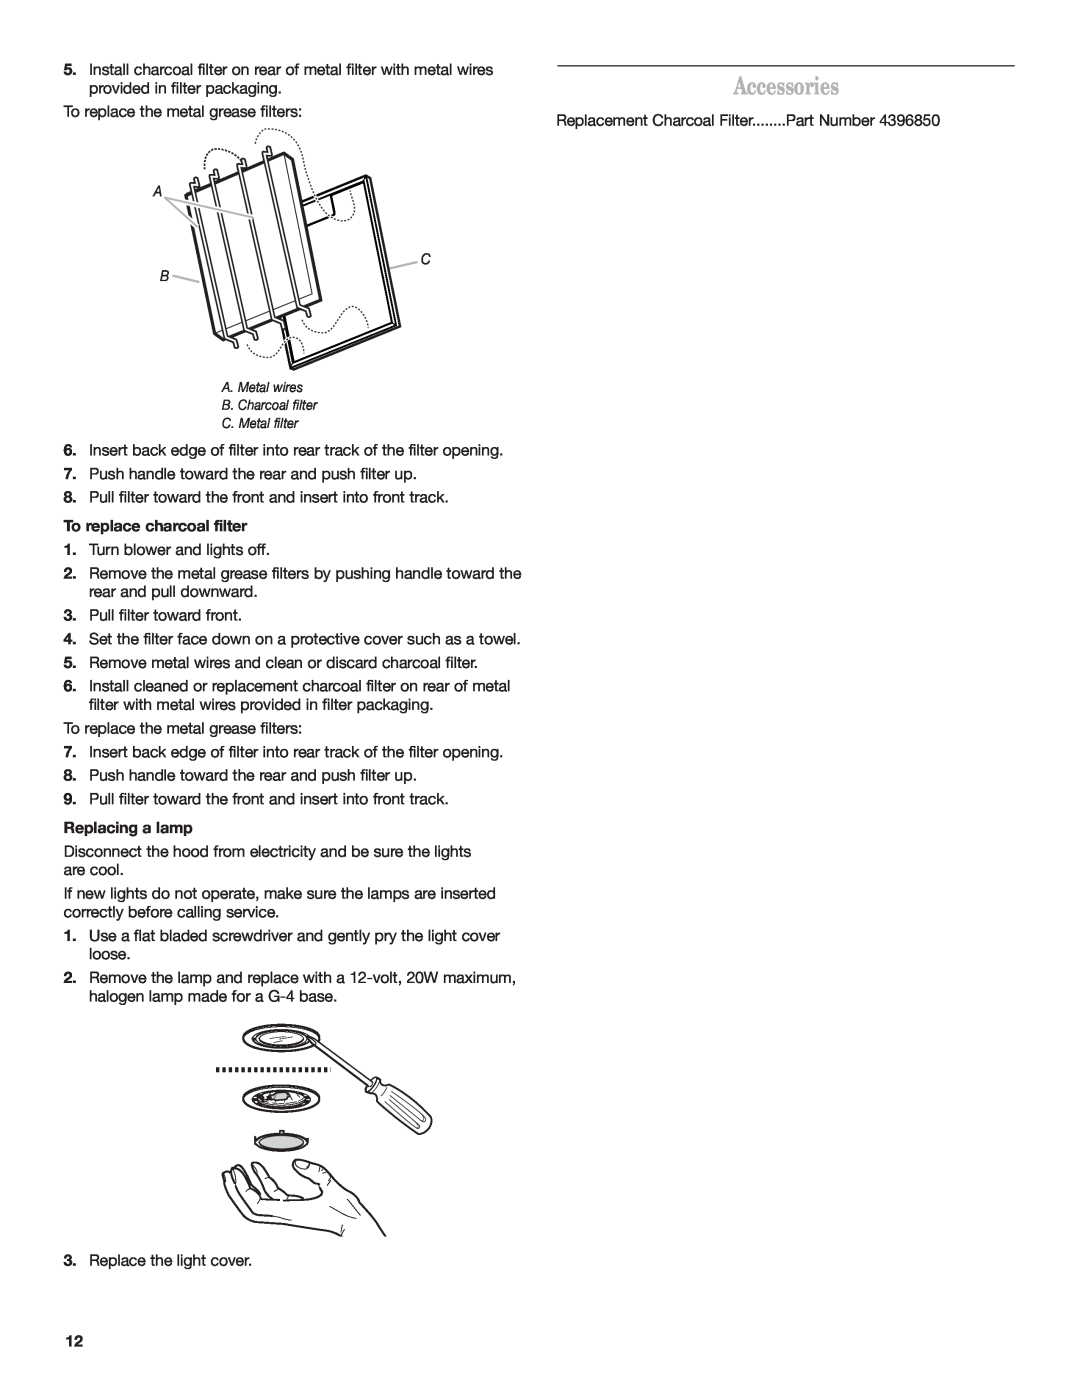 Whirlpool Ventilation Hood installation instructions Accessories, To replace charcoal filter, Replacing a lamp 